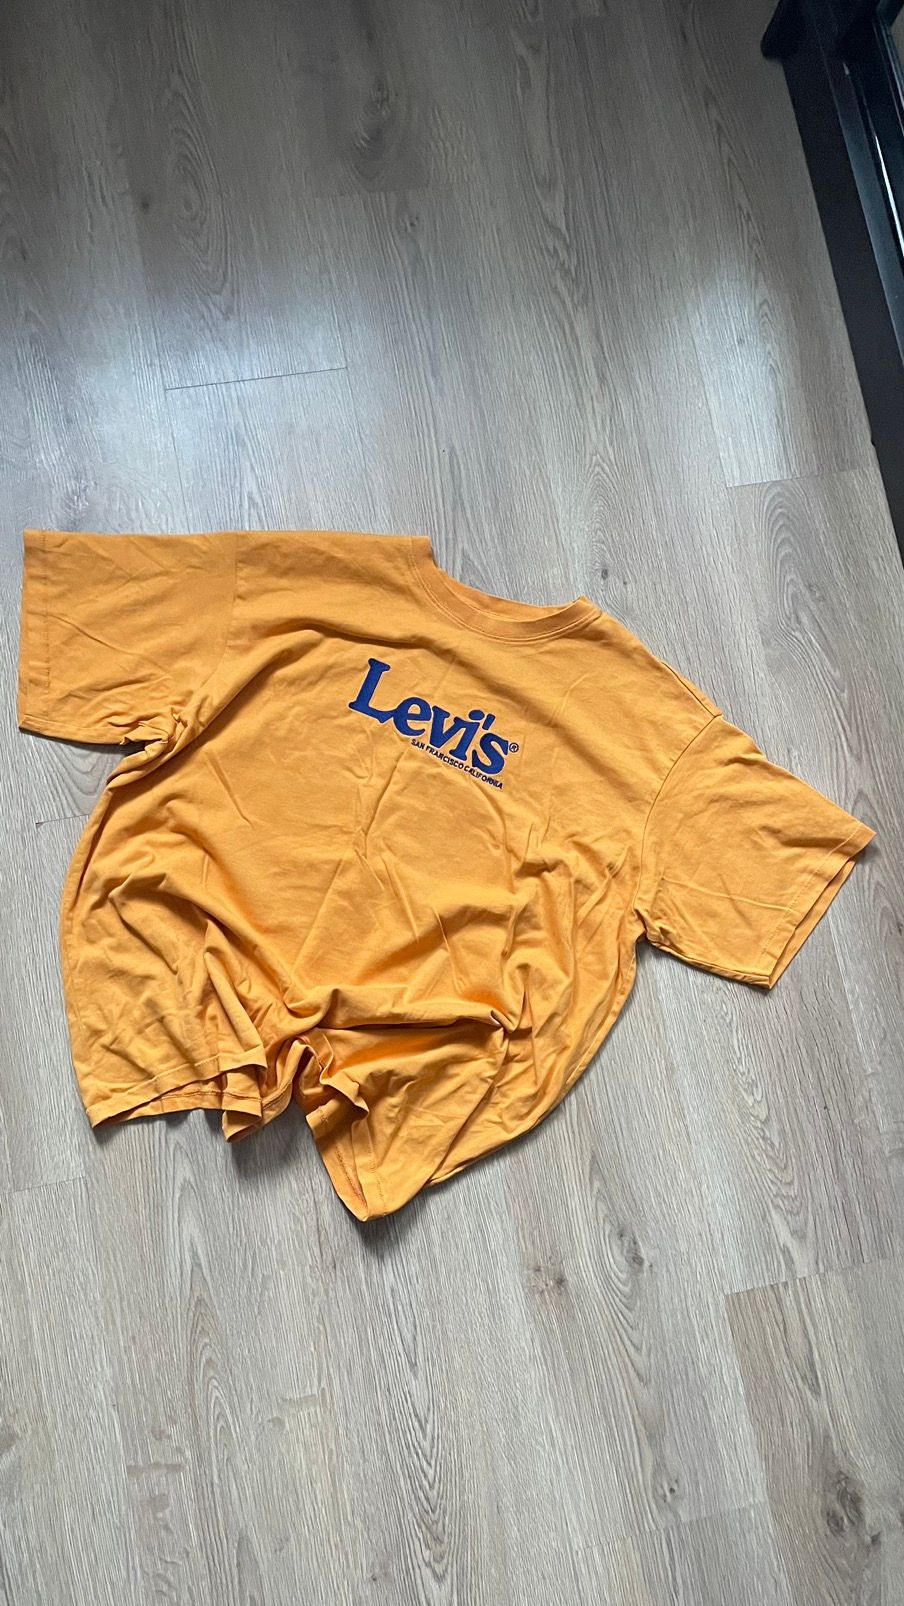 Pre-owned Levis X Levis Vintage Clothing Yellow Tee Levi's Vintage Collection 90's Big Logo